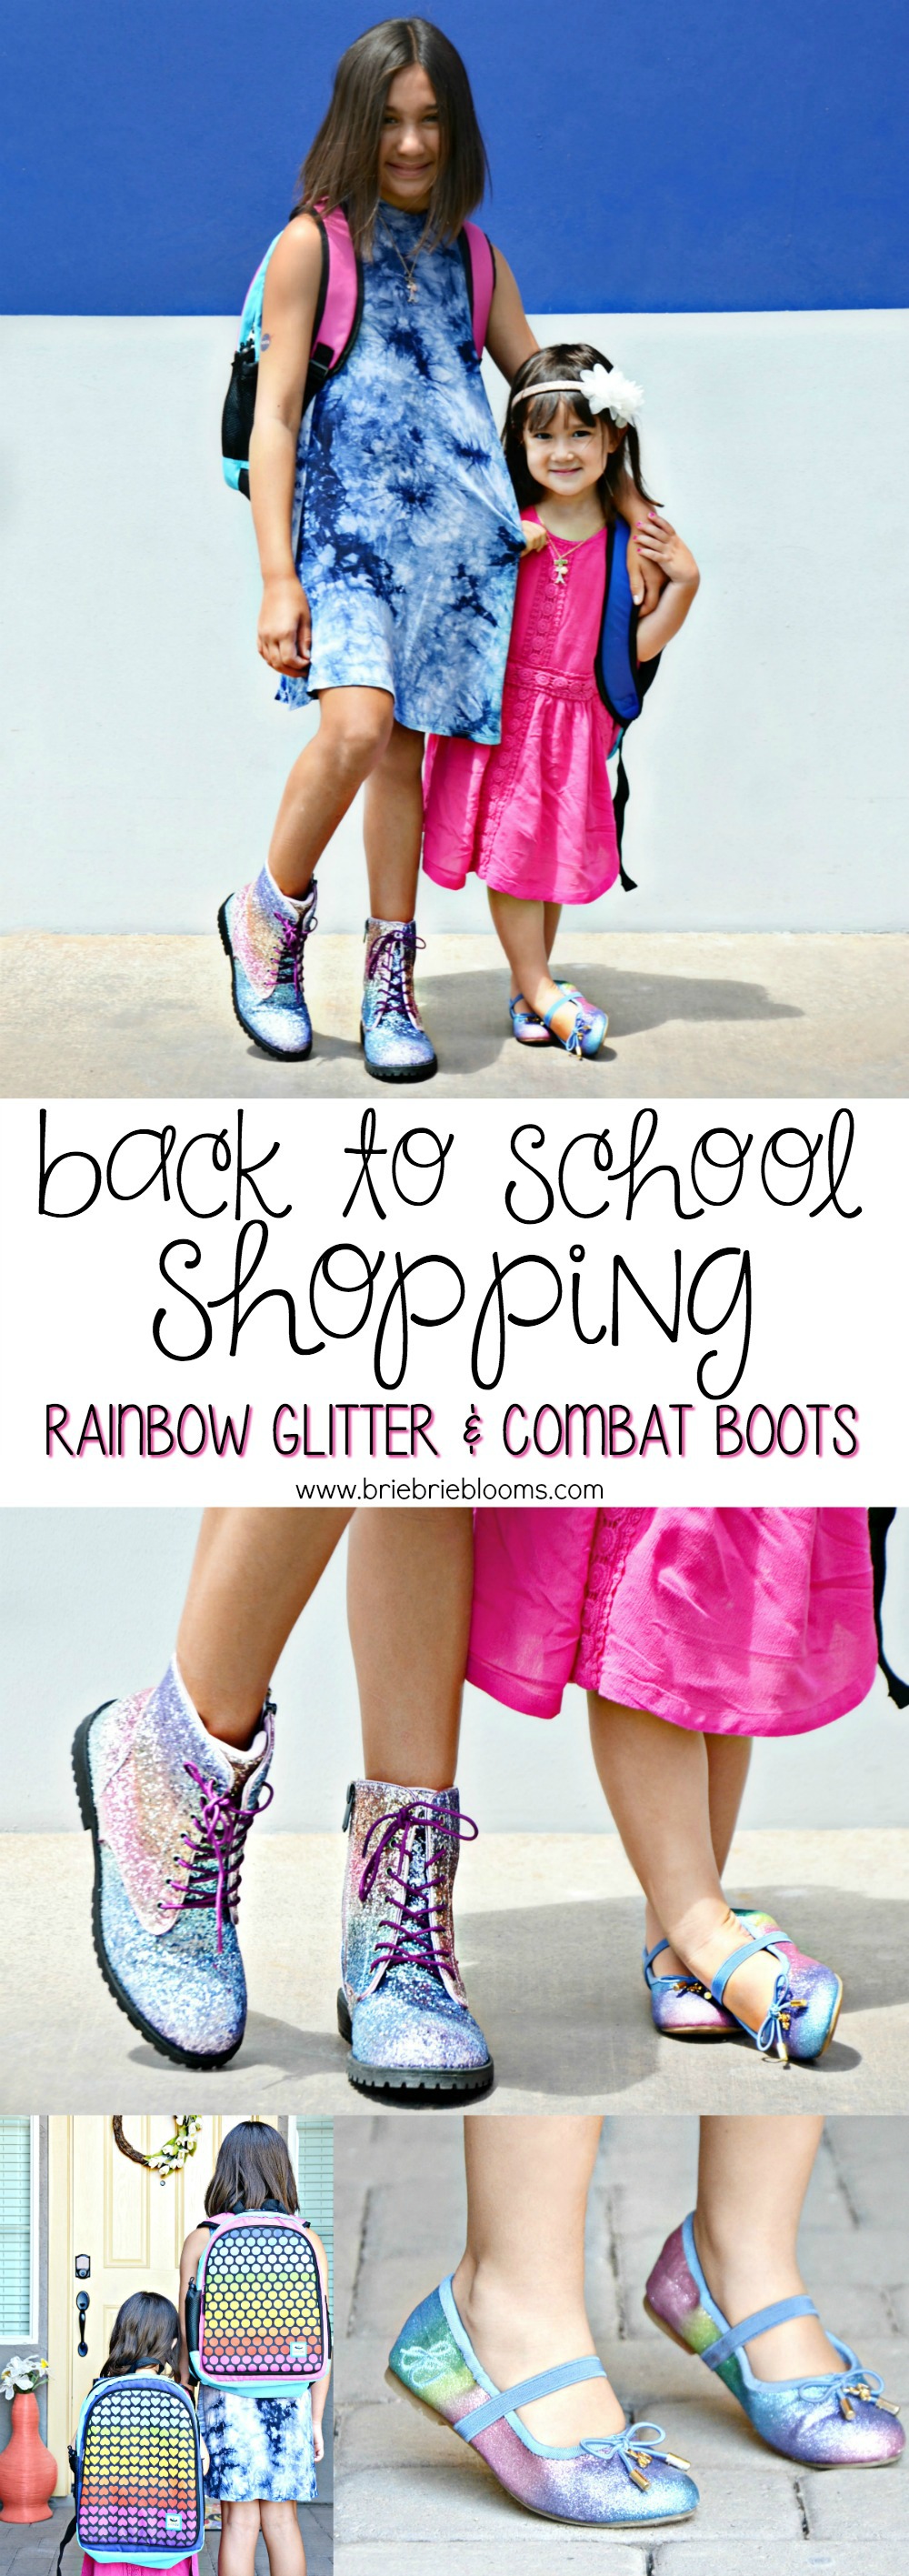 Rainbow glitter and combat boots have my daughters excited for back to school shopping. 